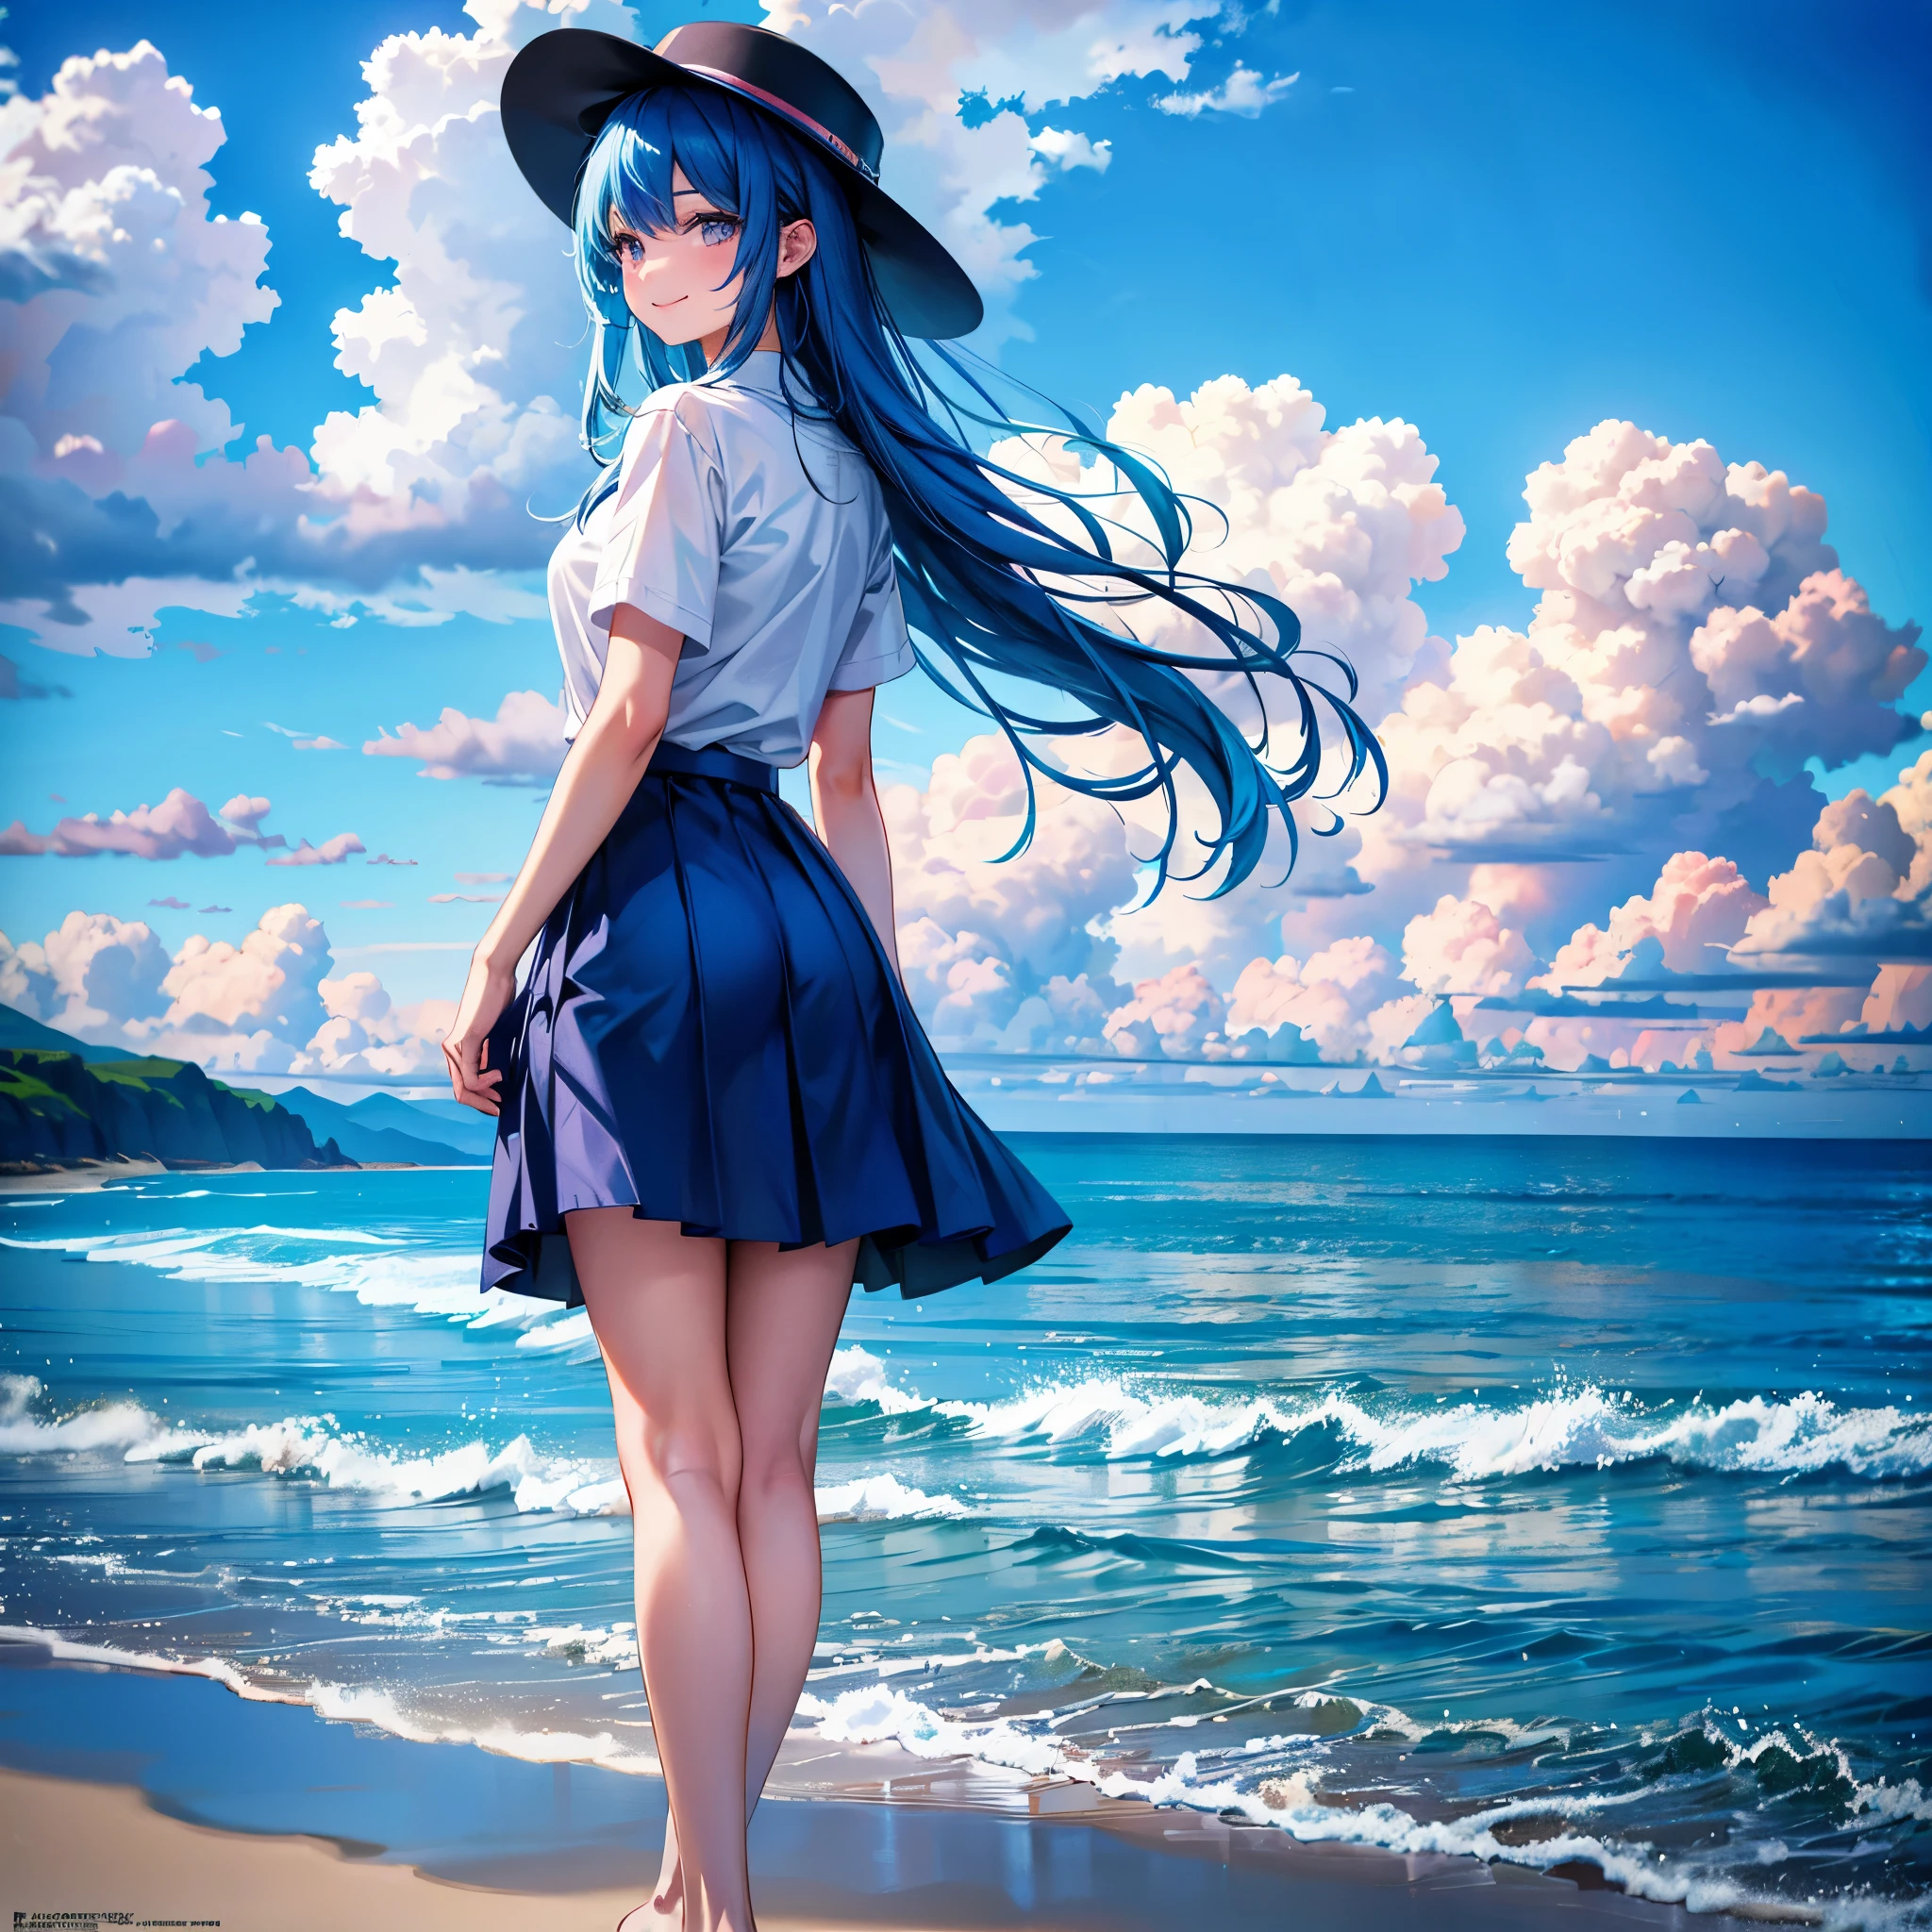 absurdity, high resolution, (official art, beautiful and aesthetic: 1.2), sparkling sky, vast world,((1 girl)), staring, awe-inspiring expression, distant horizon, clouds, natural beauty, inspiration, light effect, wide shot, from afar,beautiful woman, (masterpiece), (high resolution 8K), professional illustration, 1 girl, late teenage, walking, long shot, from behind, , short sleeve shirt, blue skirt,hat, long hair, blue hair, smile, looking up, on the beach, blue sky, daytime, in summer, natural lighting, detailed body, detailed skin